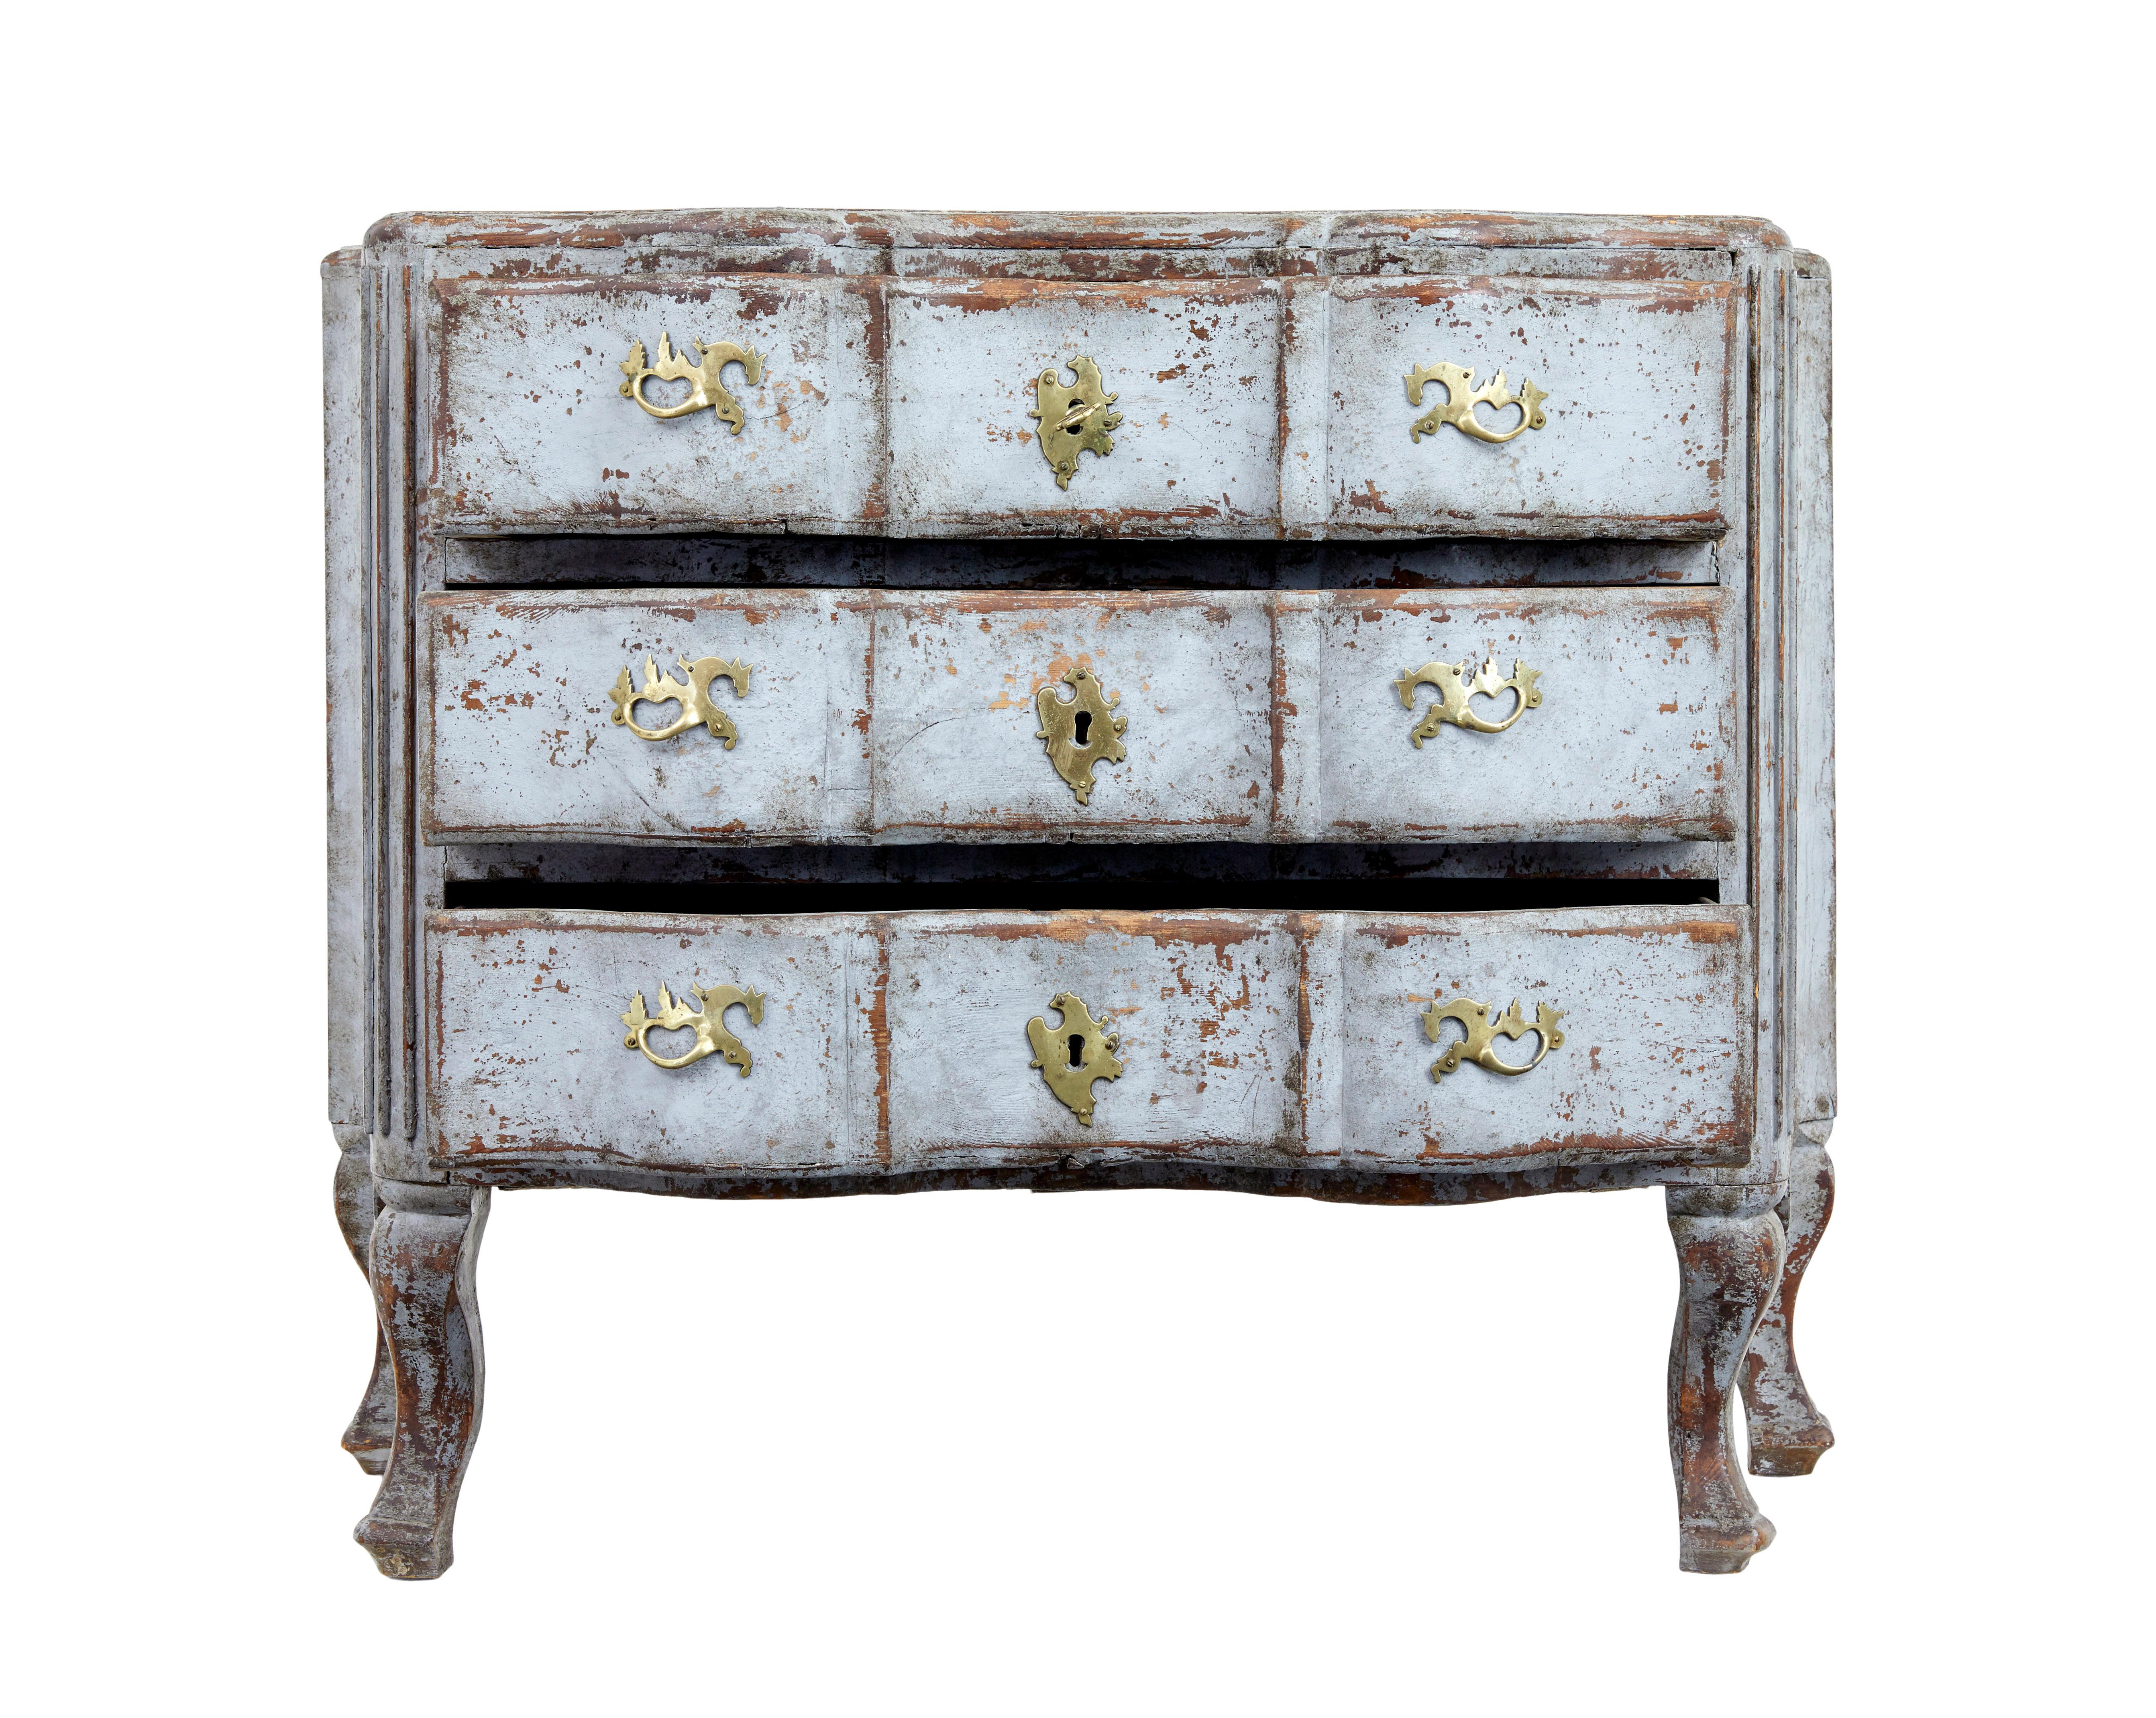 19th Century Early 19th century Swedish painted baroque revival chest of drawers For Sale